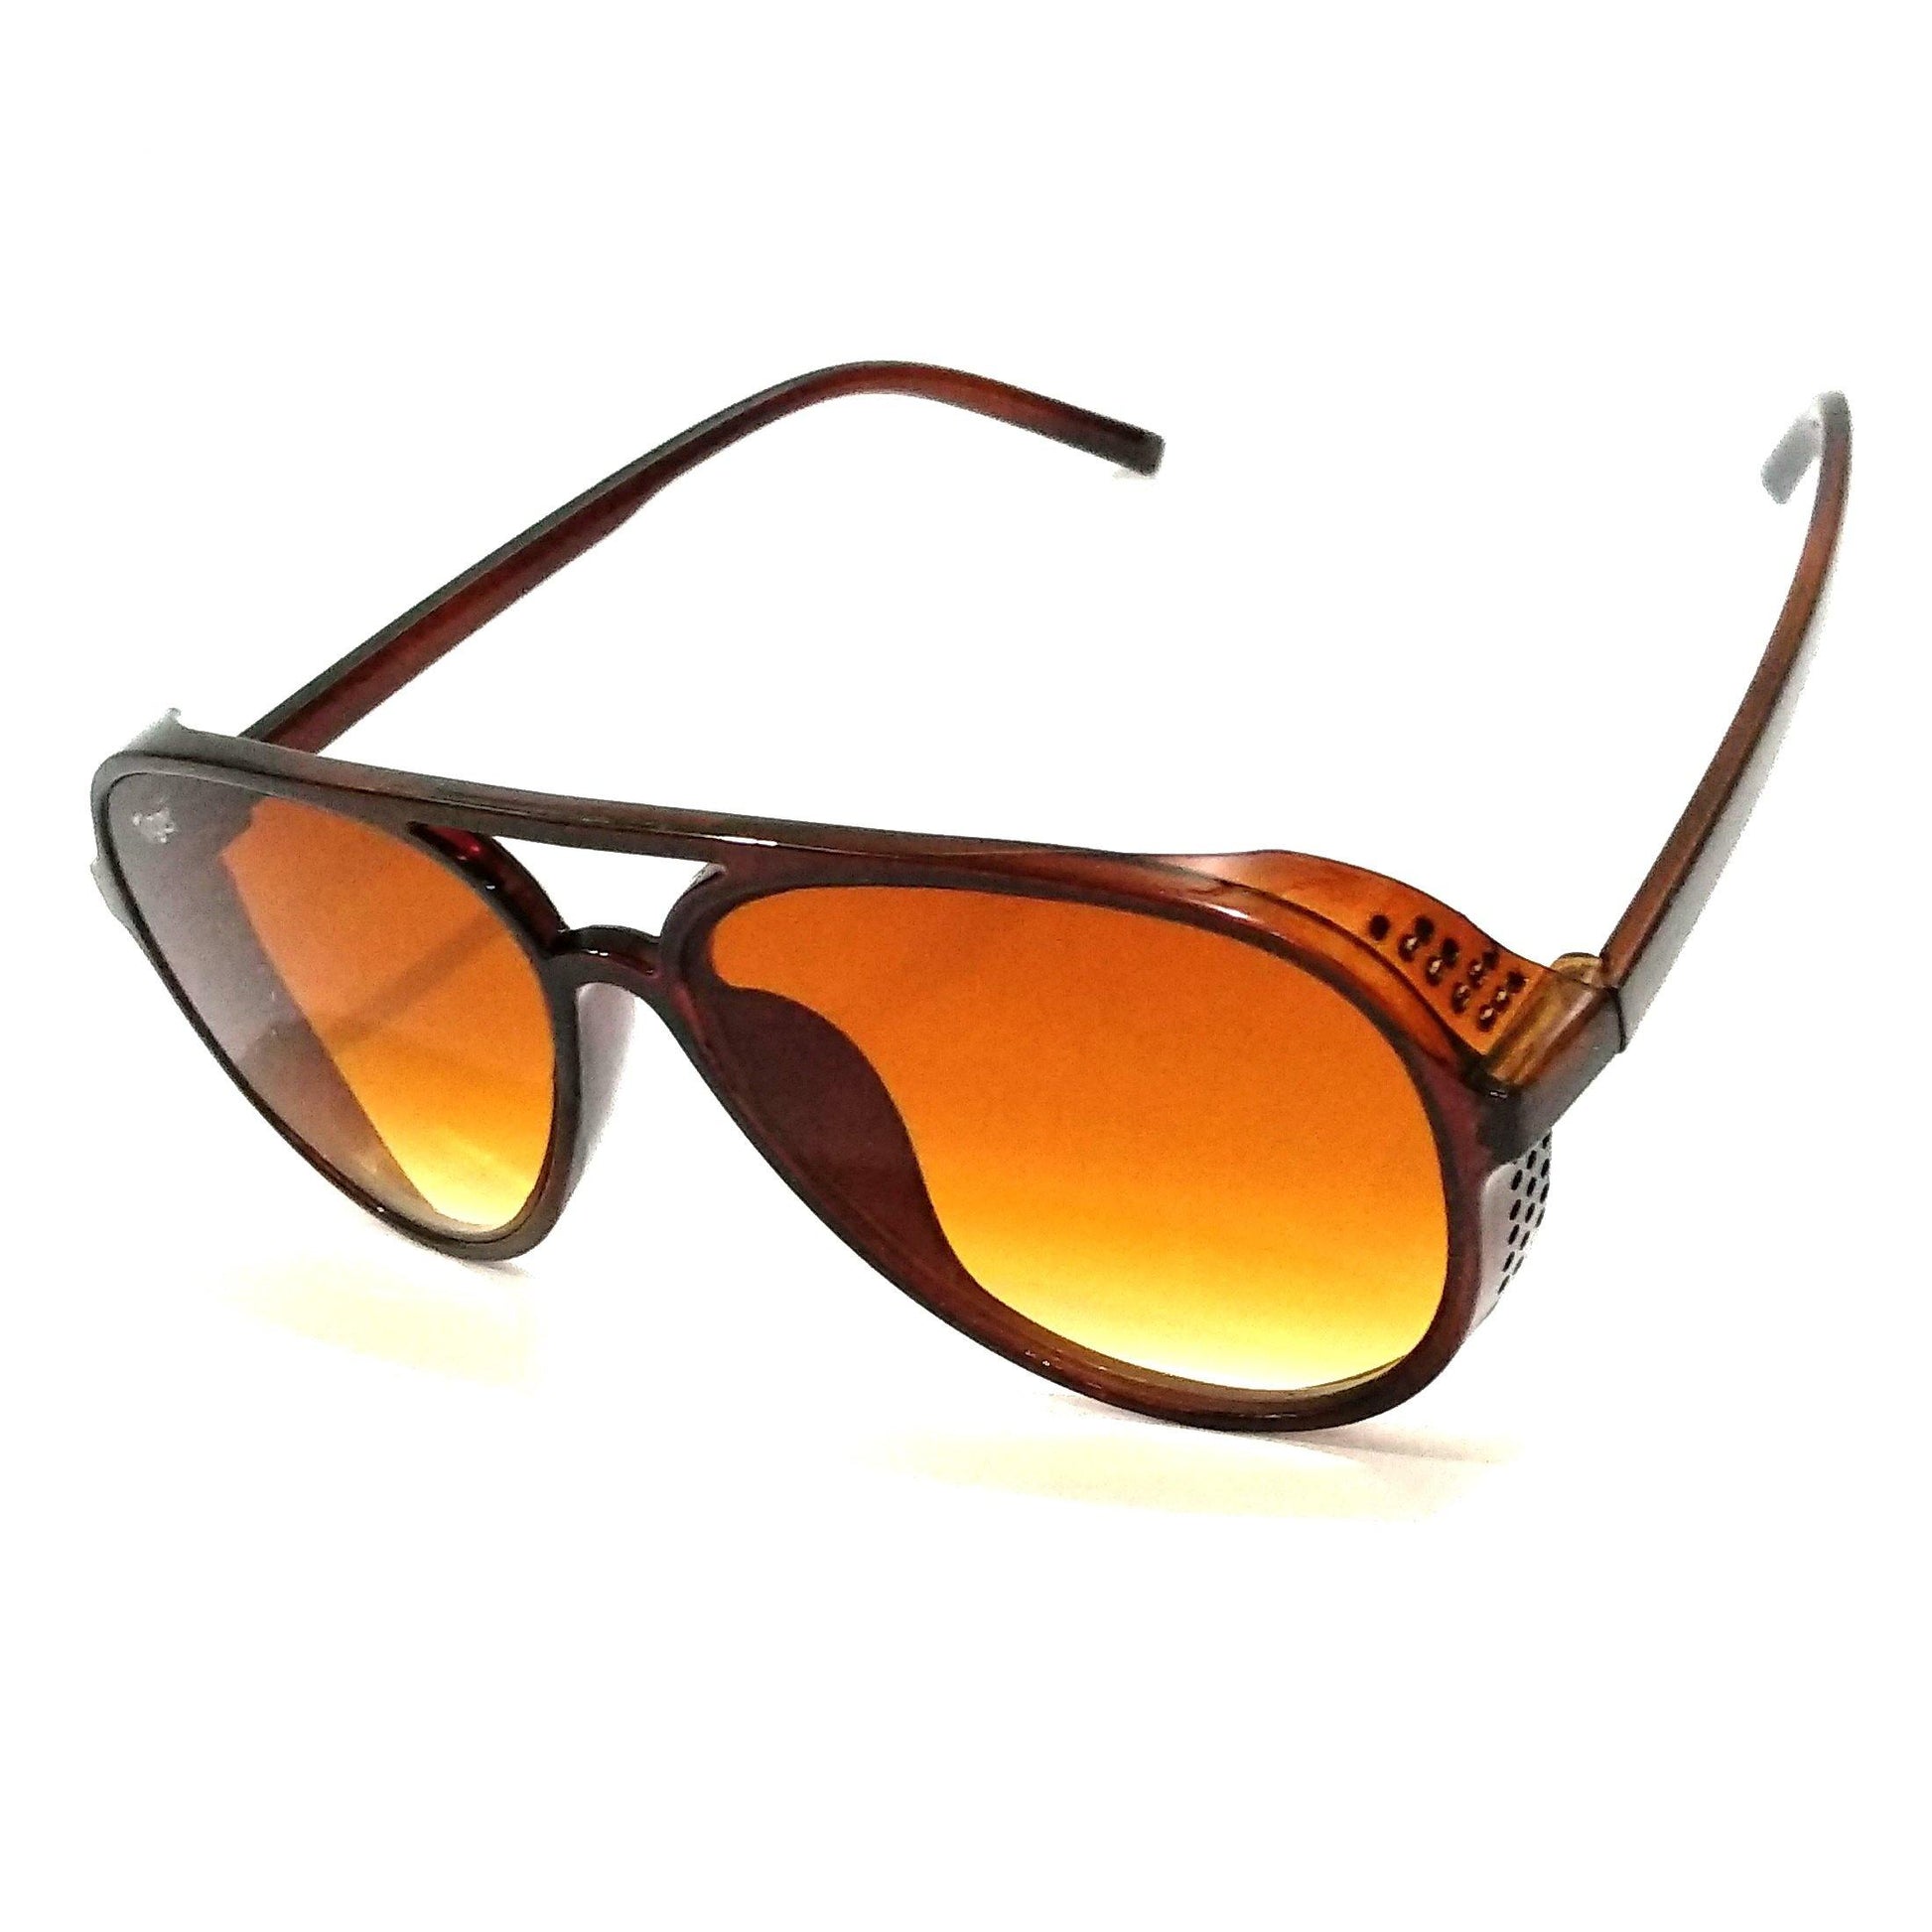 Buy Brown Steampunk Aviator Sunglasses for Men - Glasses India Online in India